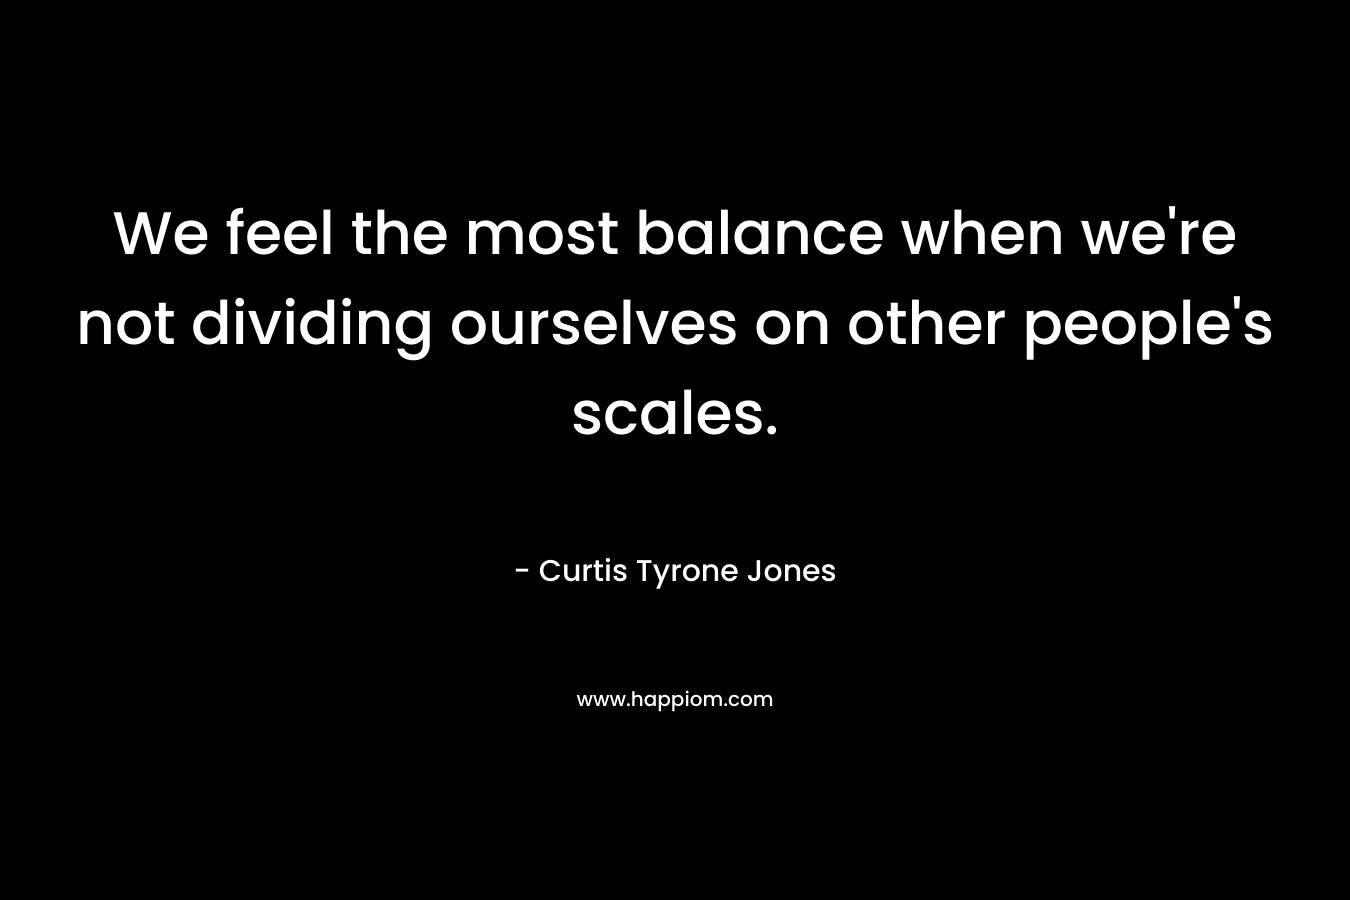 We feel the most balance when we're not dividing ourselves on other people's scales.